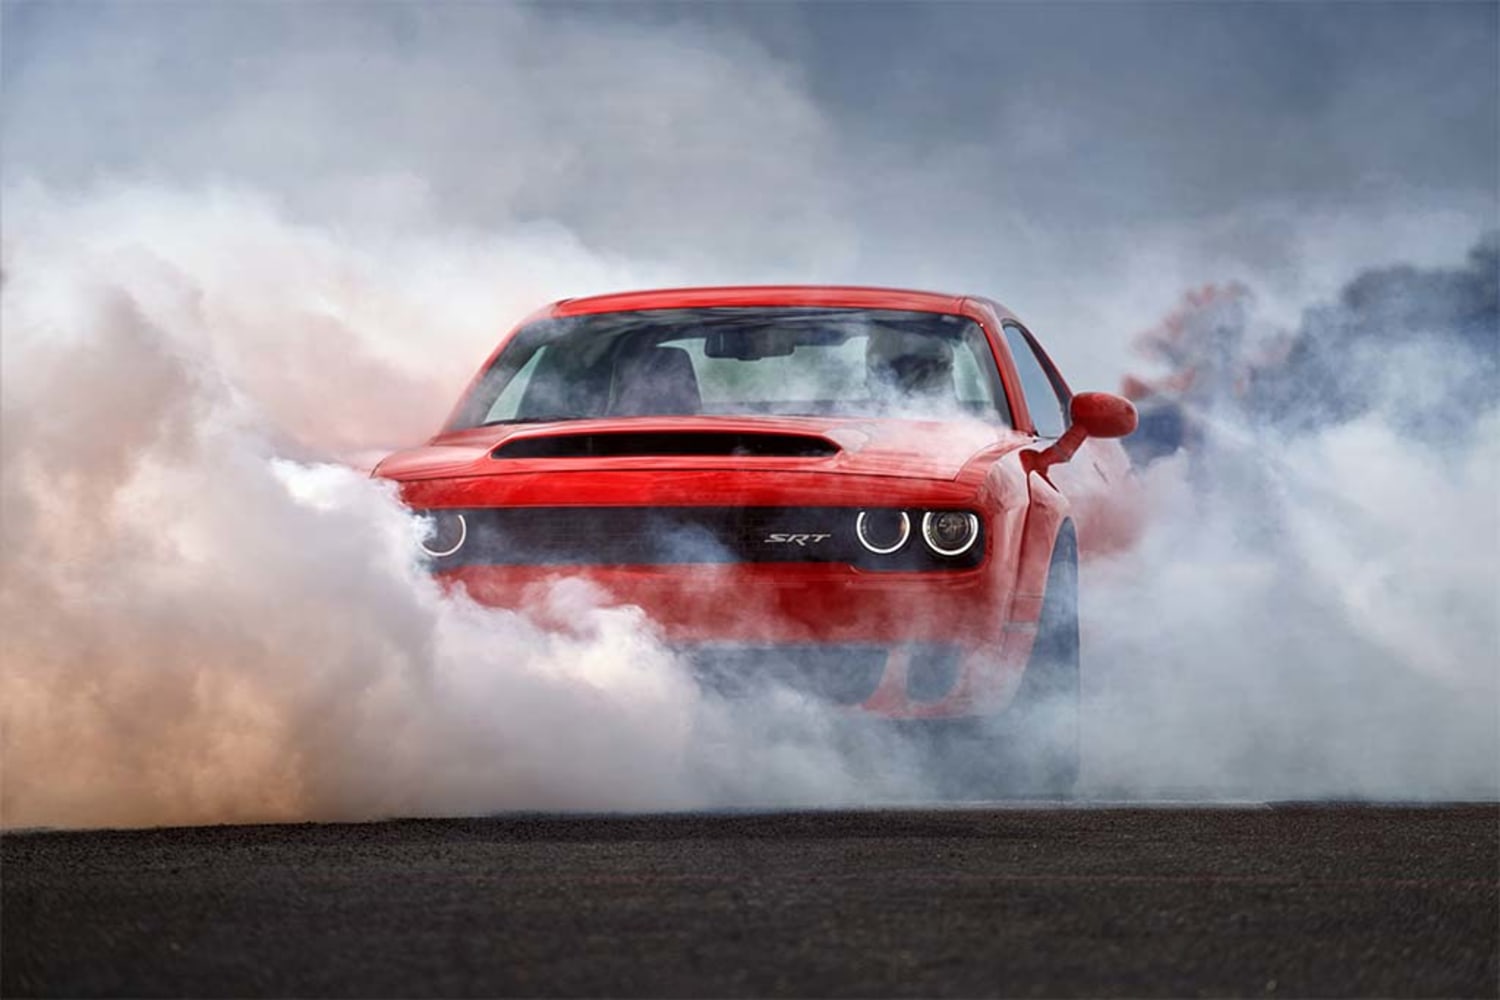 New Dodge Demon Is the Fastest Production Car in the World, Can